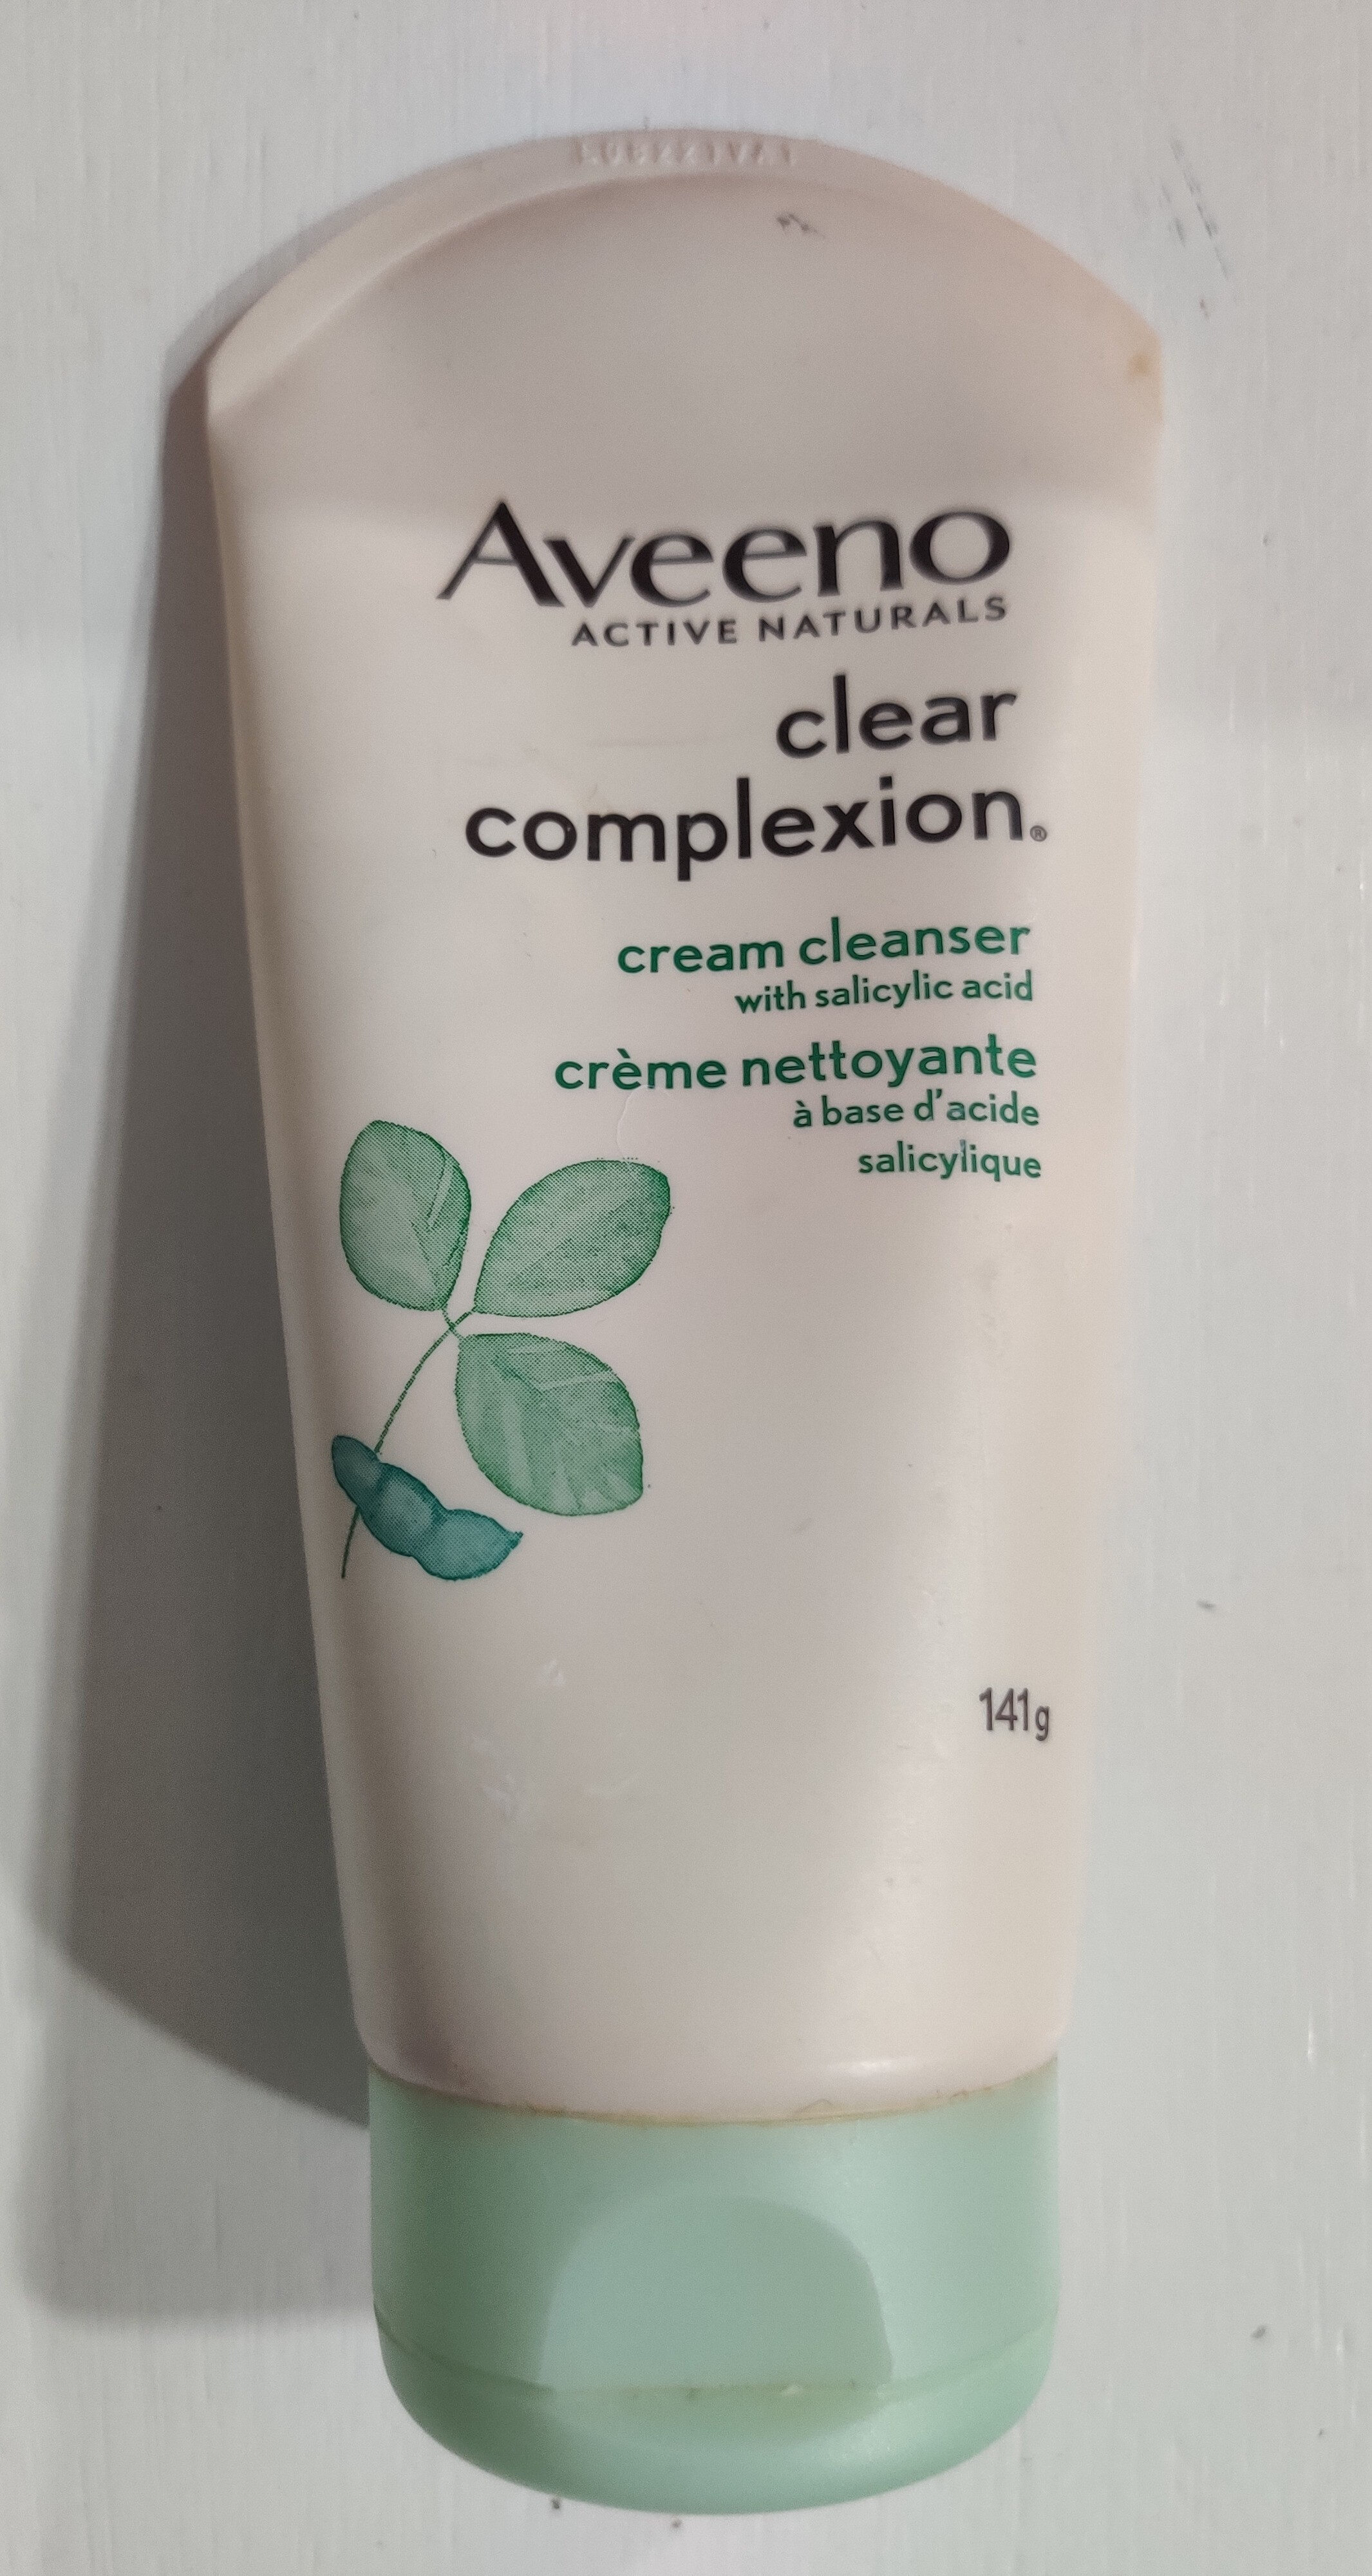 Aveeno clear completion cream cleanser - 製品 - en